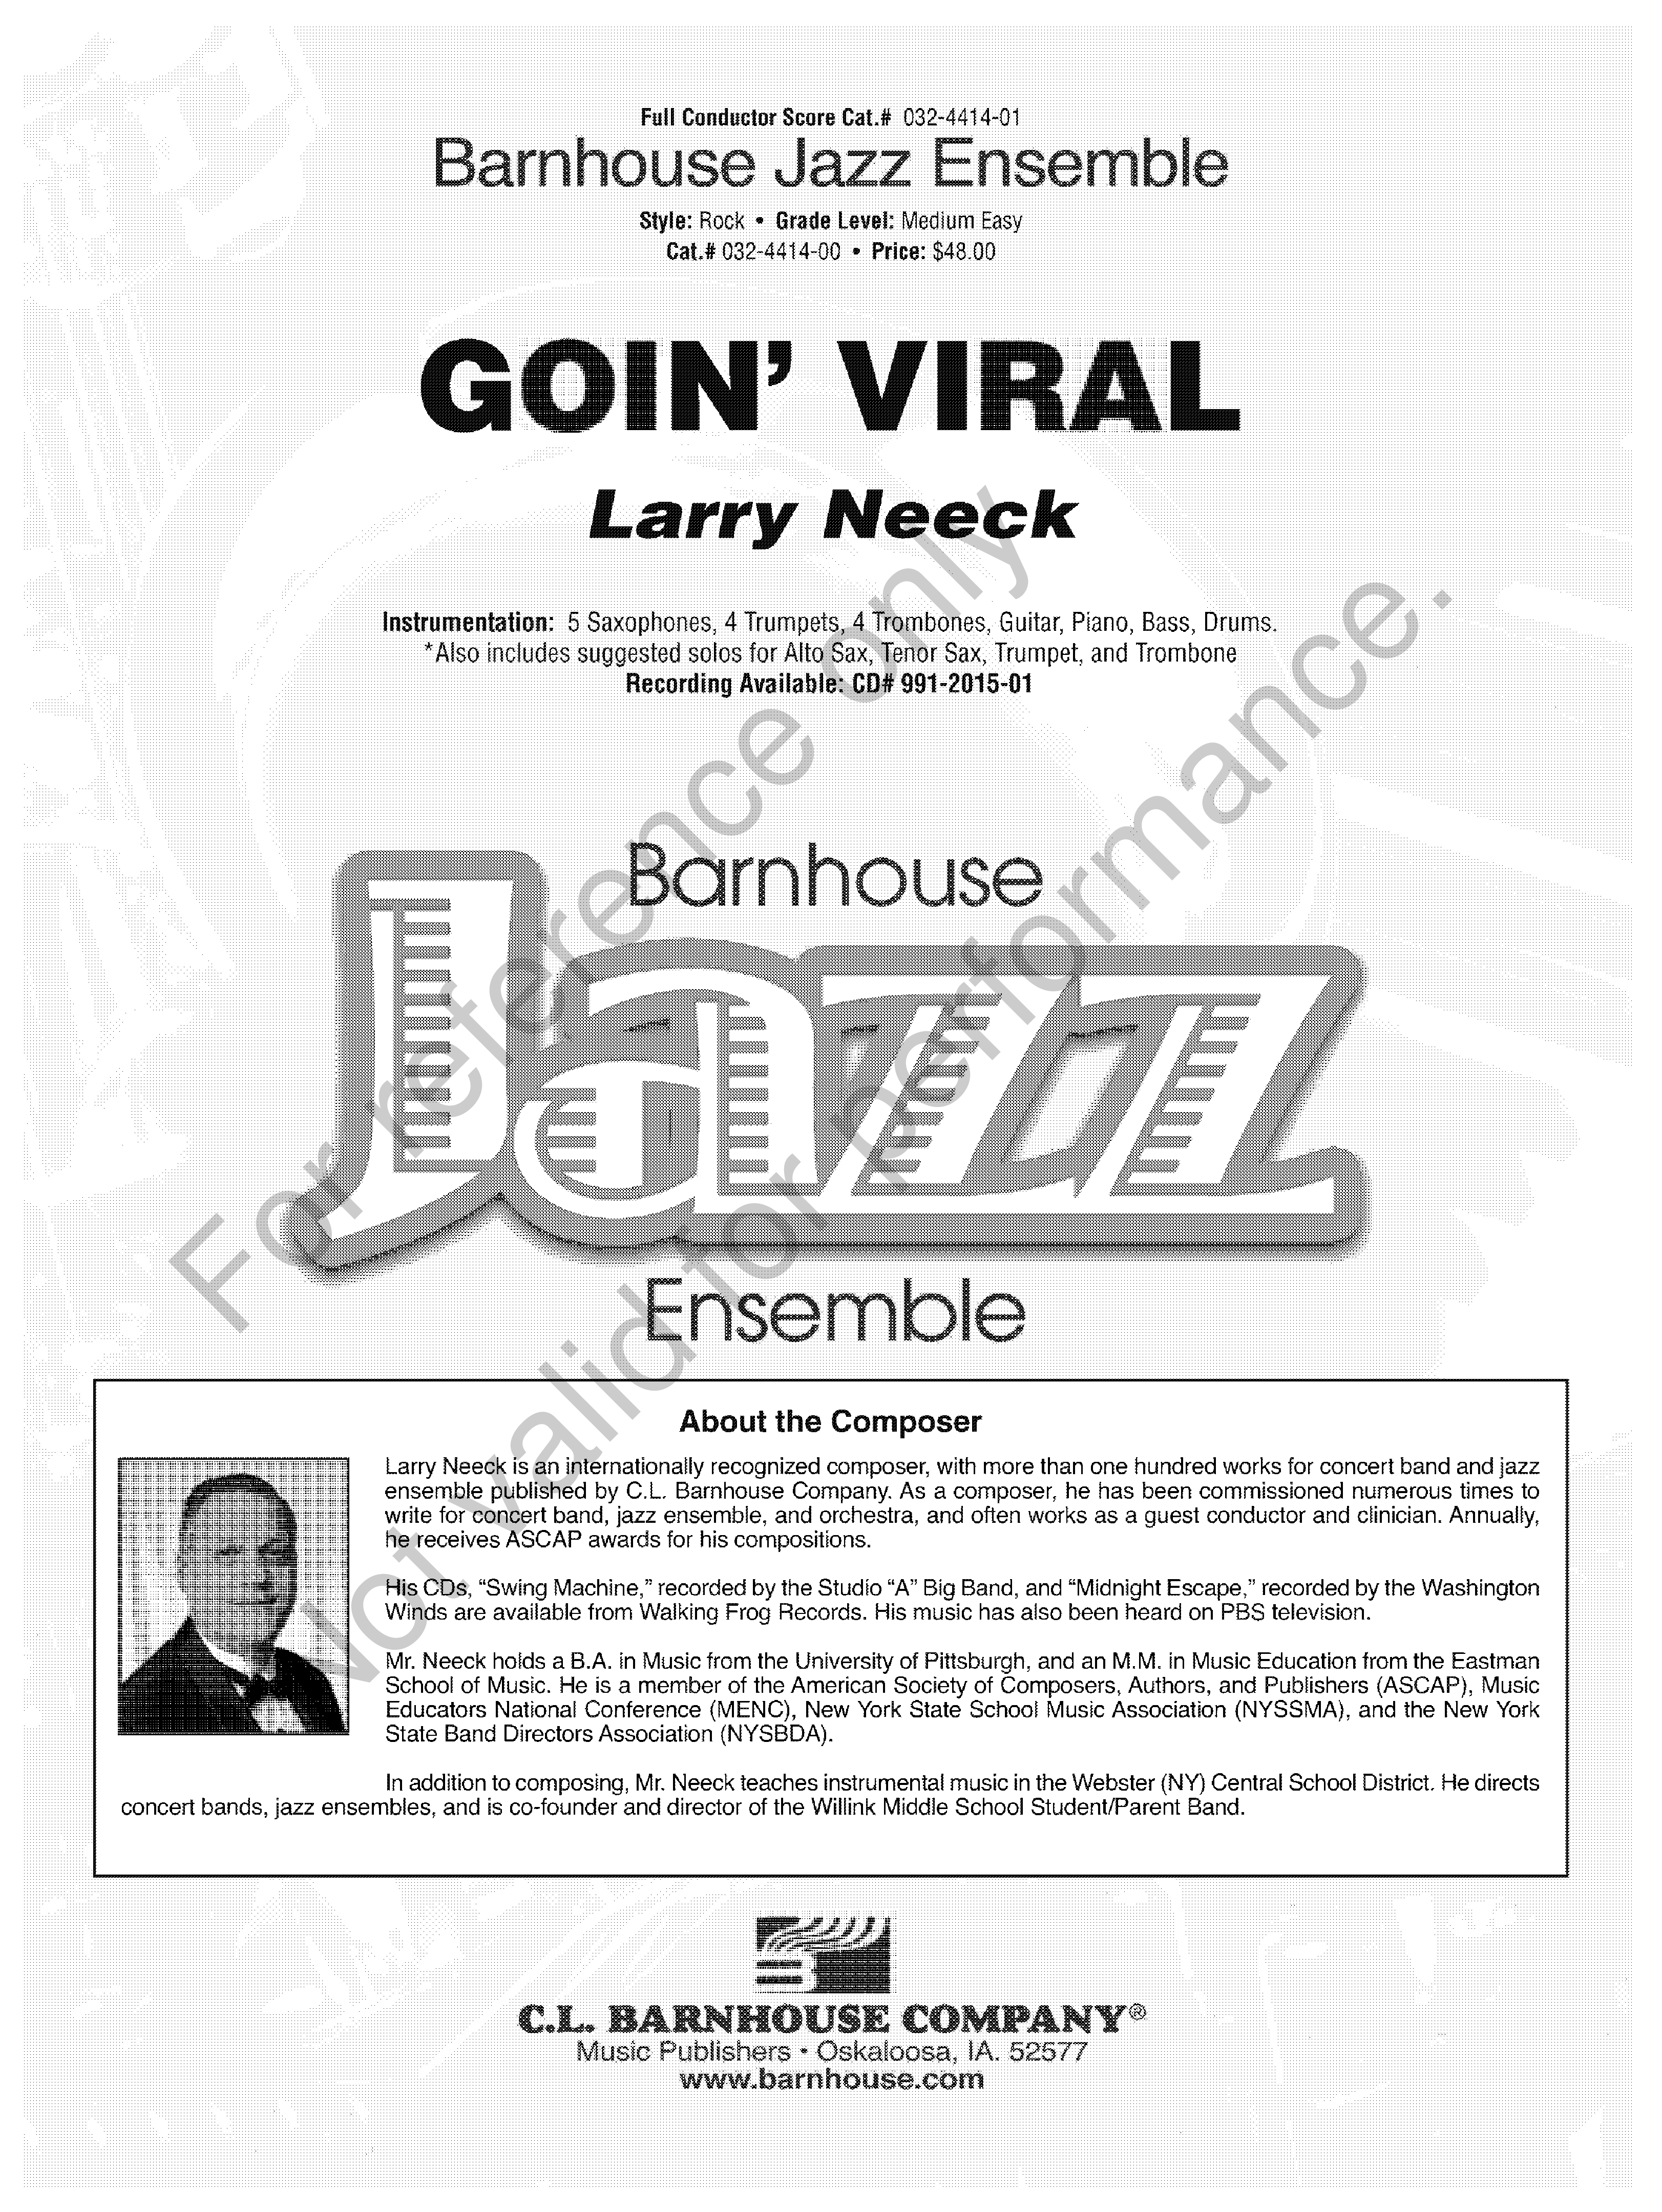 Goin' Viral by Larry Neeck